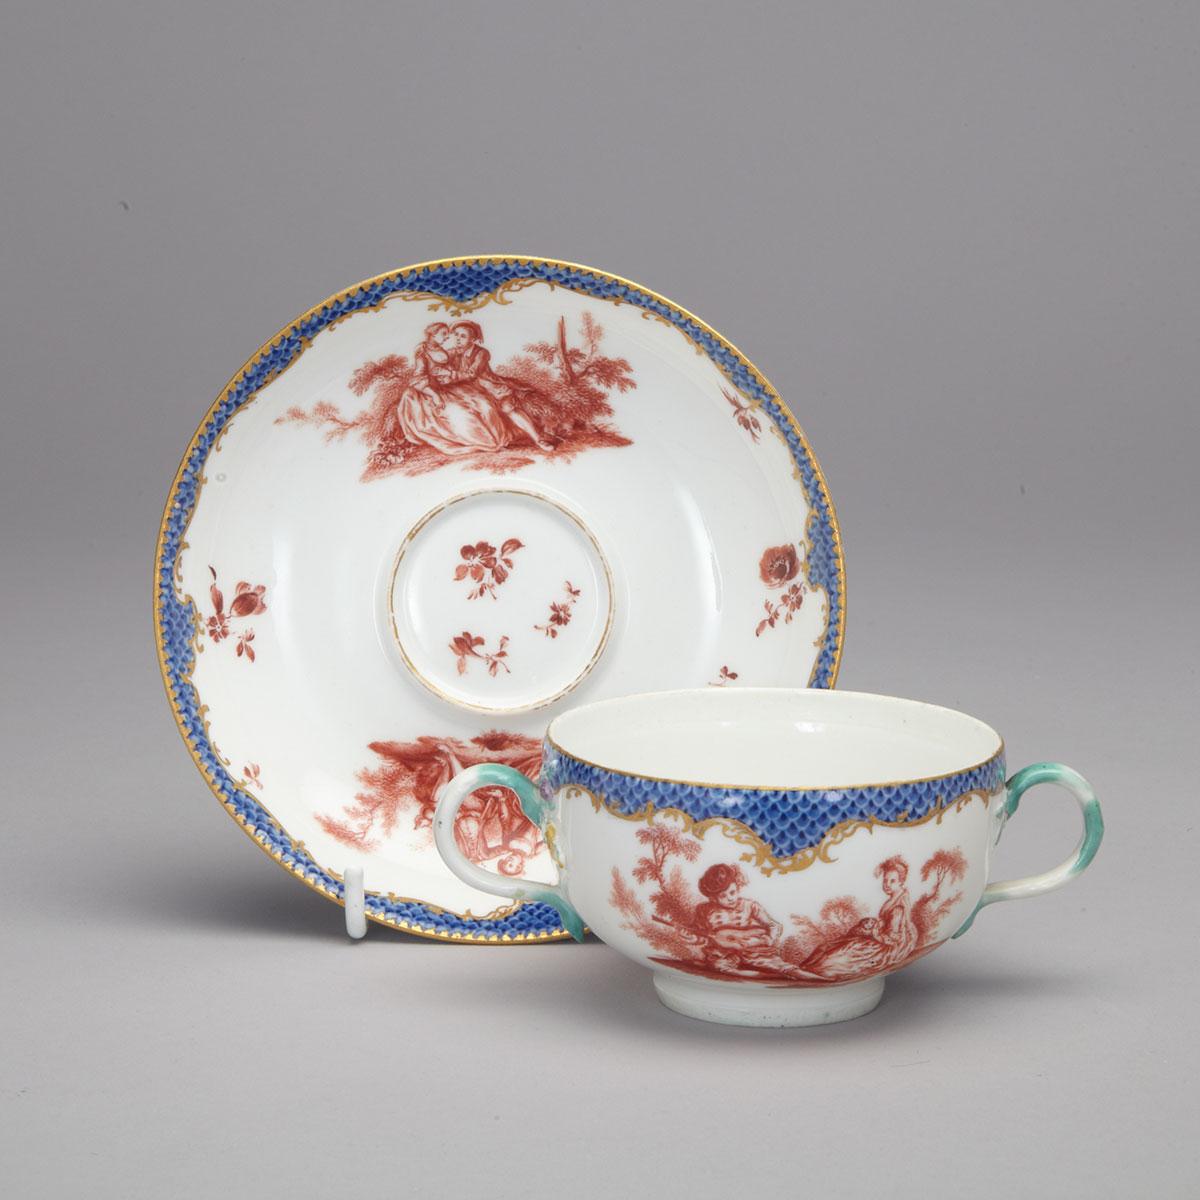 Meissen Two-Handled Cup and Saucer, late 18th century